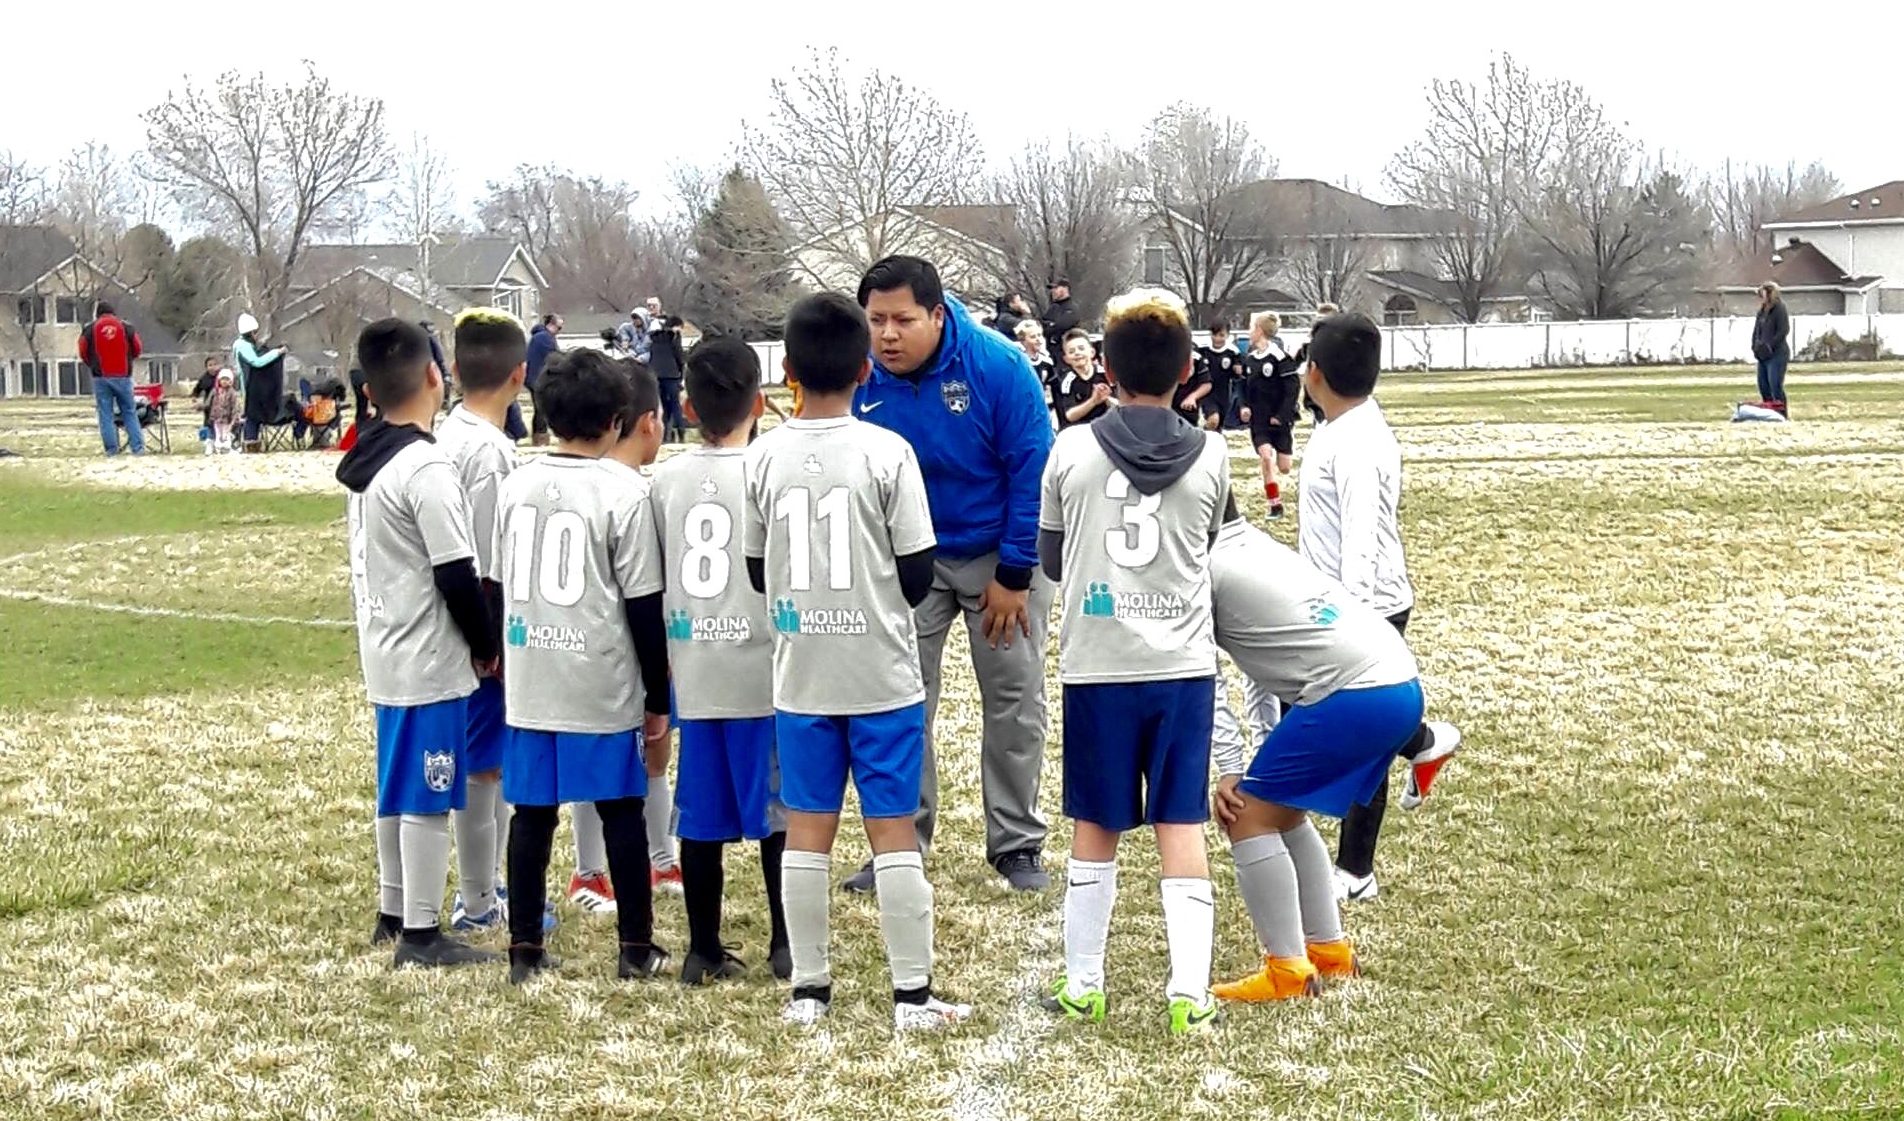 Coach talking to young soccer players on field